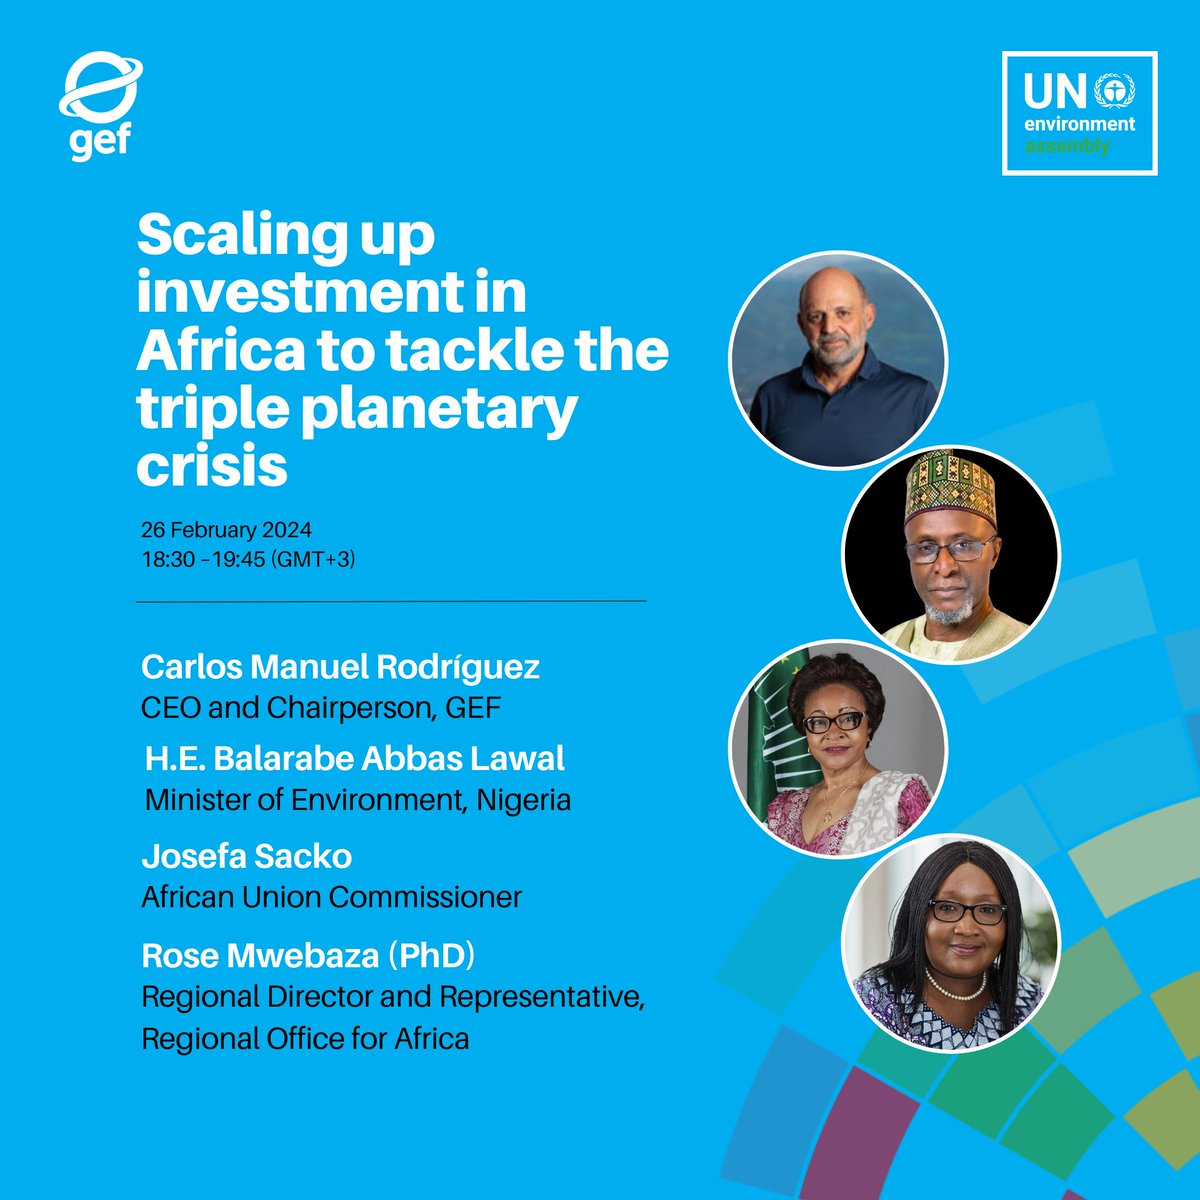 Attending #UNEA6 in #Nairobi next week? Don’t miss our side event discussing how multilateral environmental agreements can pave the way for a sustainable future. Featured speakers include @cmrodrigueze, @BalarabeAbbas_, @JosefaSacko & Dr Rose Mwebaza. 🔗sched.co/1QPqz